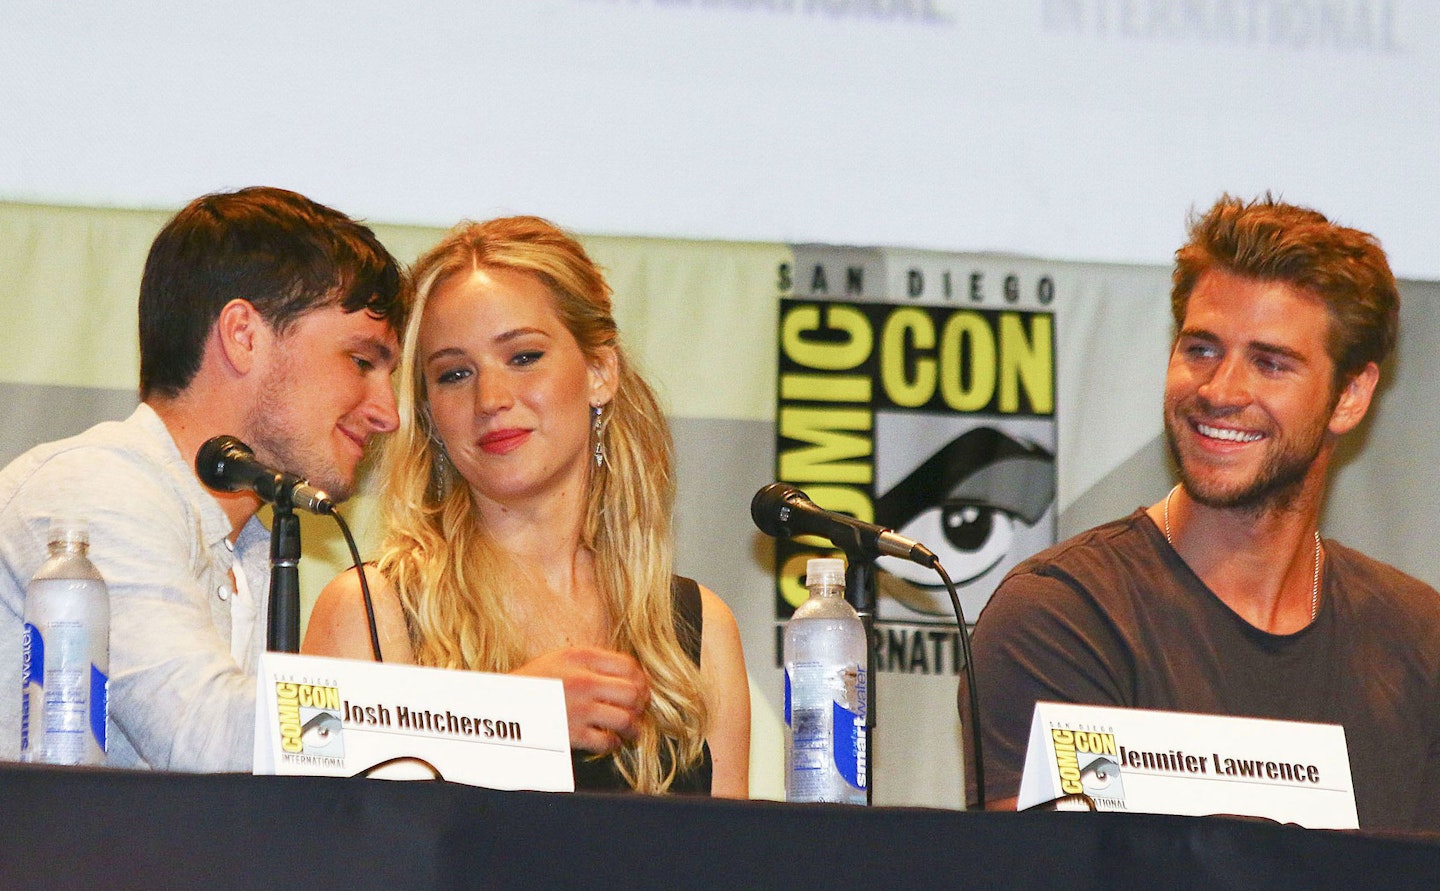 J-Law: "Hey Josh, watch out for that Liam guy, he wants to steal my stuff."